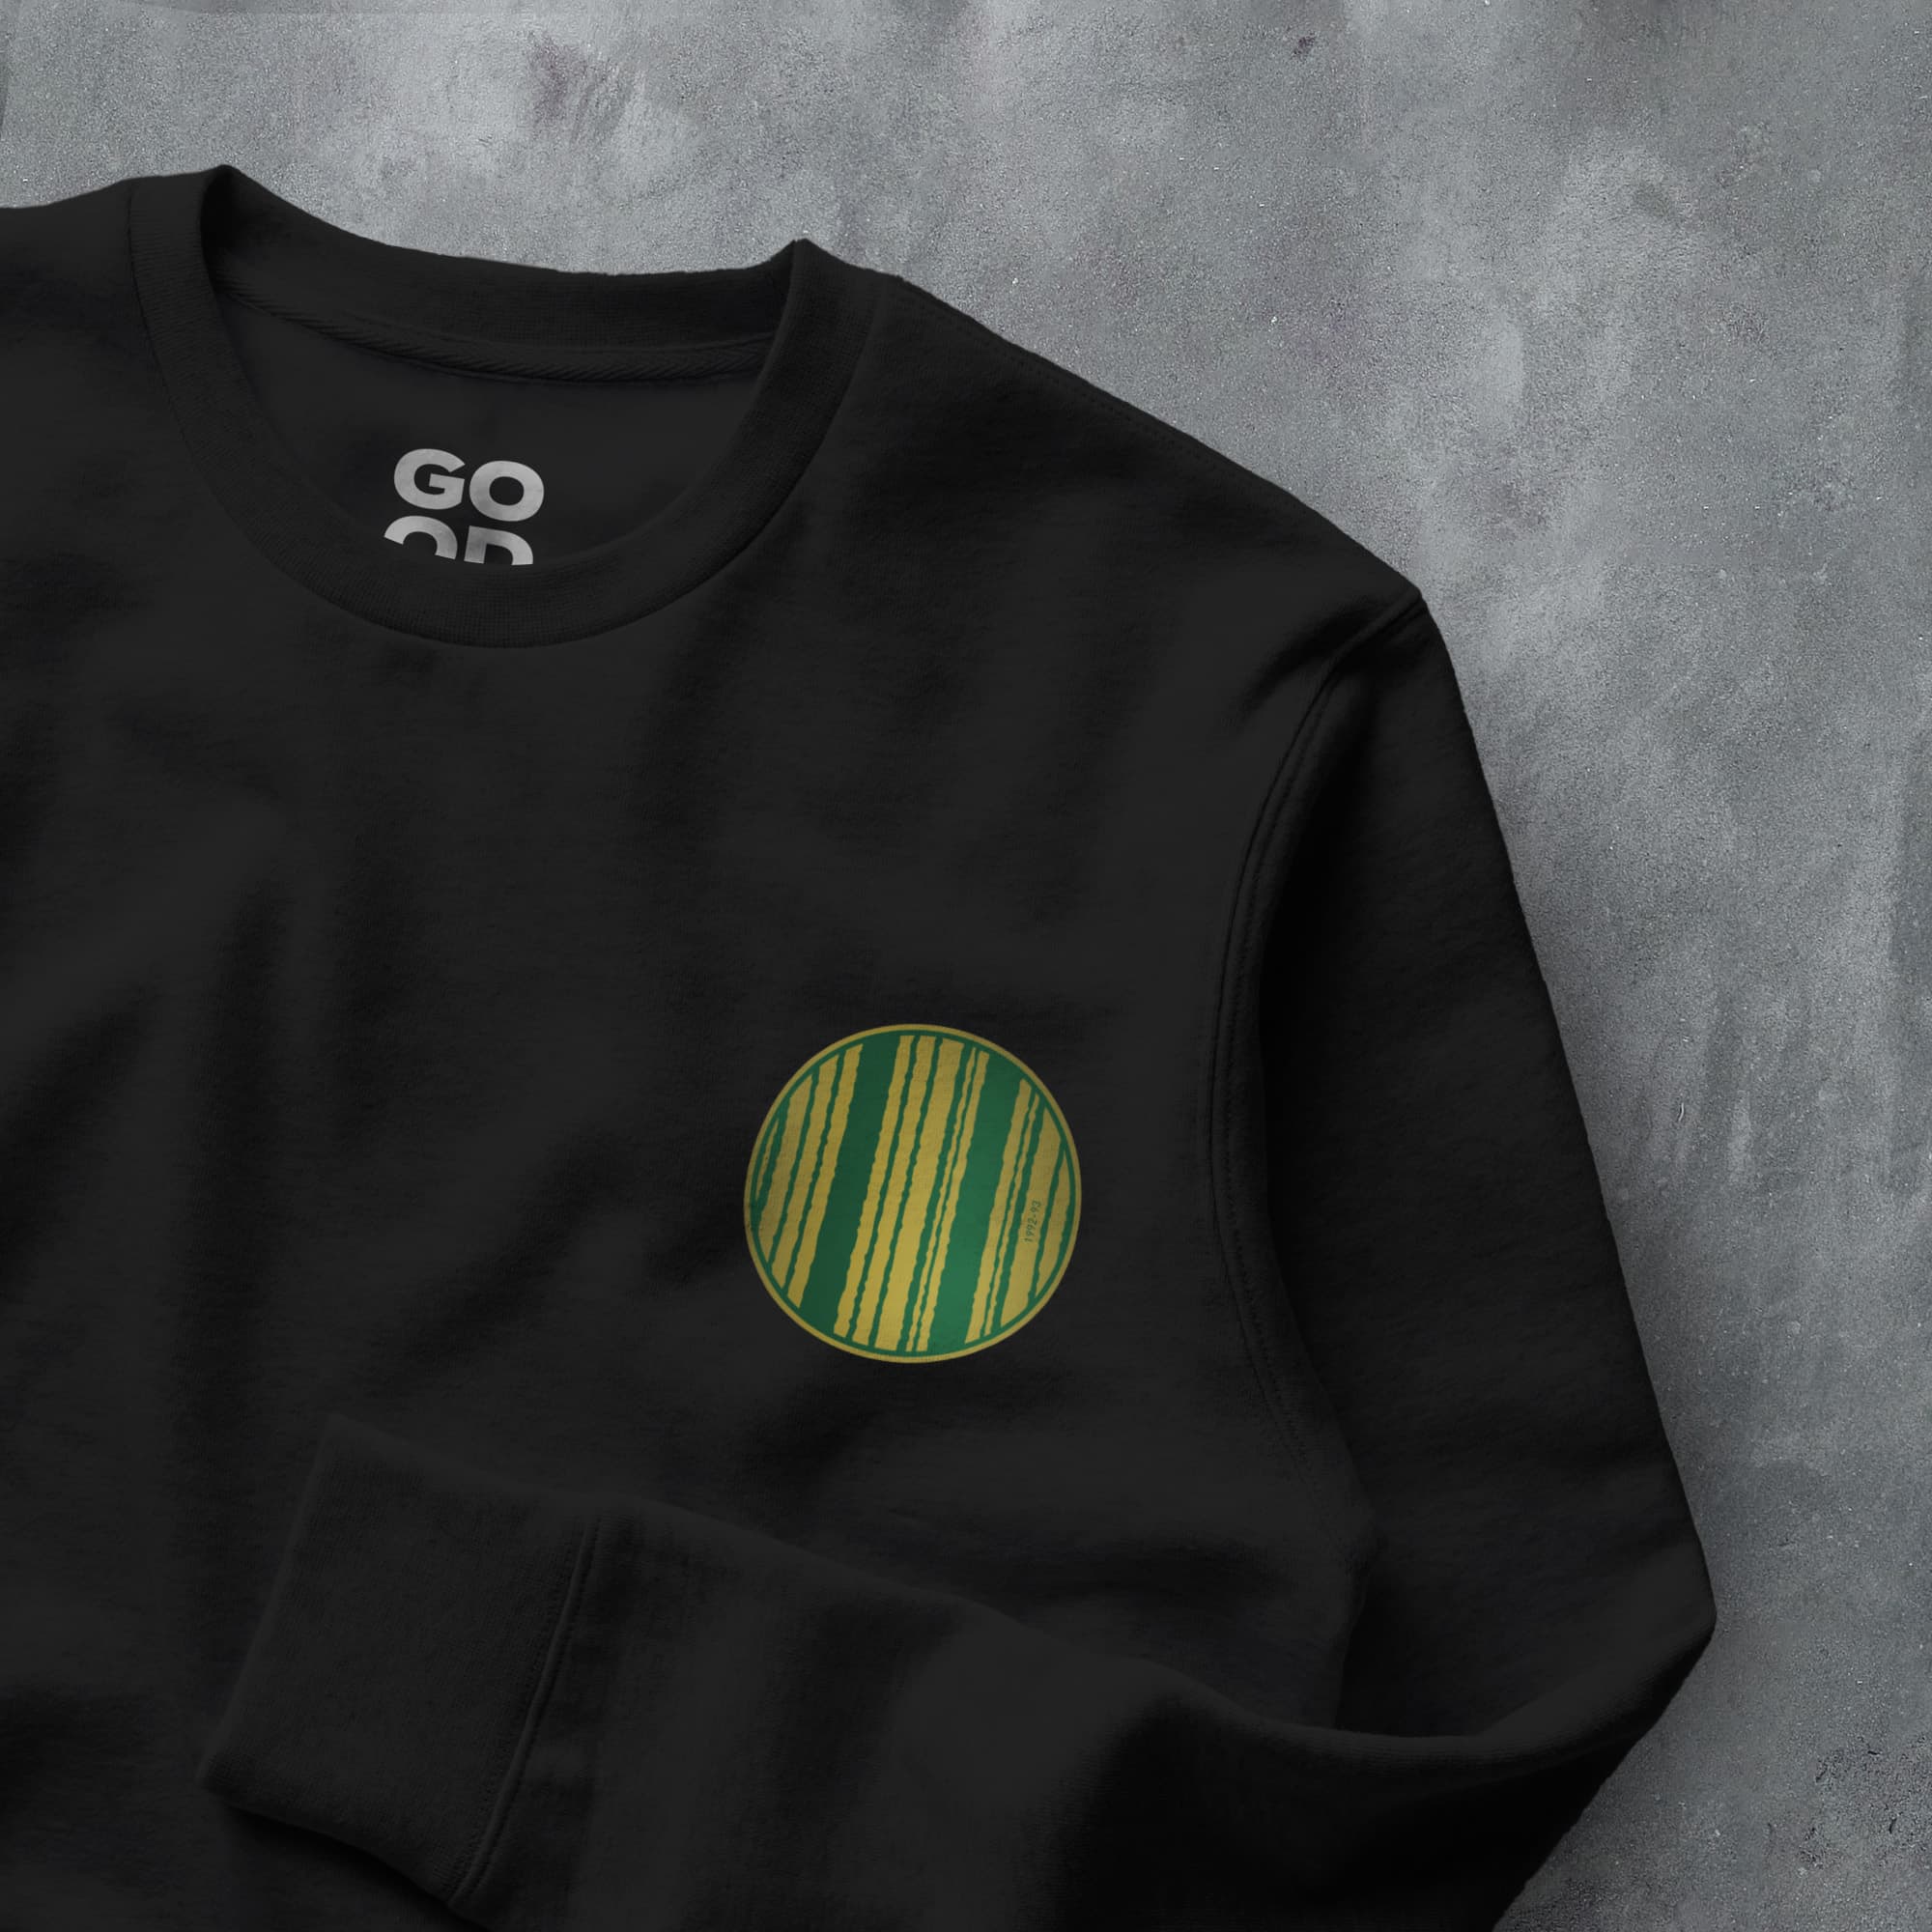 a black sweatshirt with a green circle on it